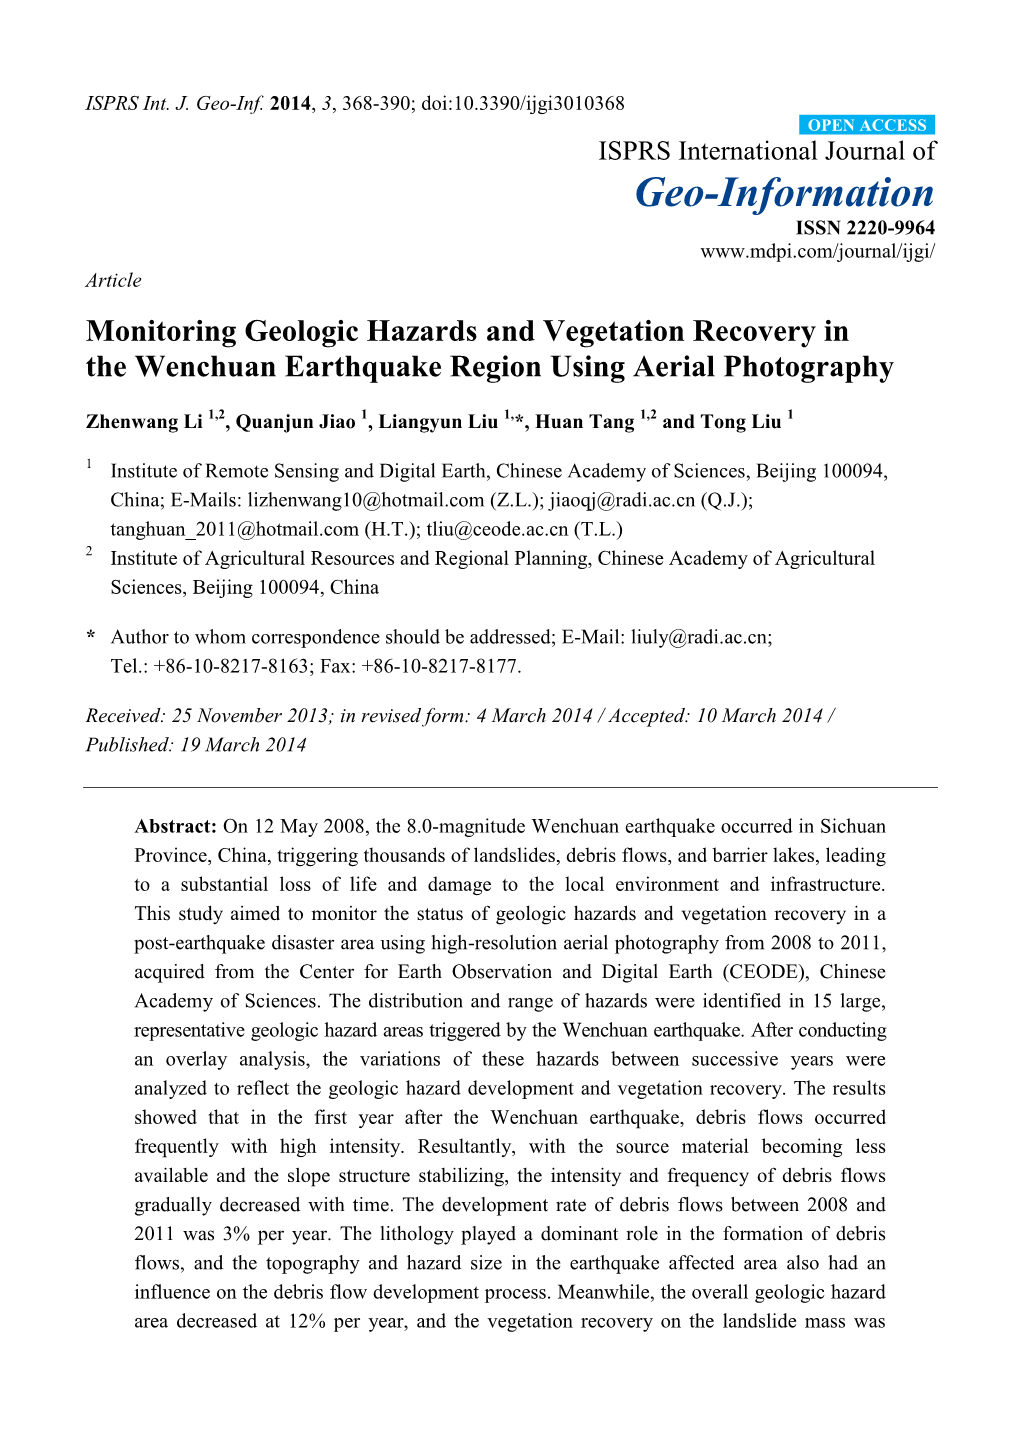 Monitoring Geologic Hazards and Vegetation Recovery in the Wenchuan Earthquake Region Using Aerial Photography